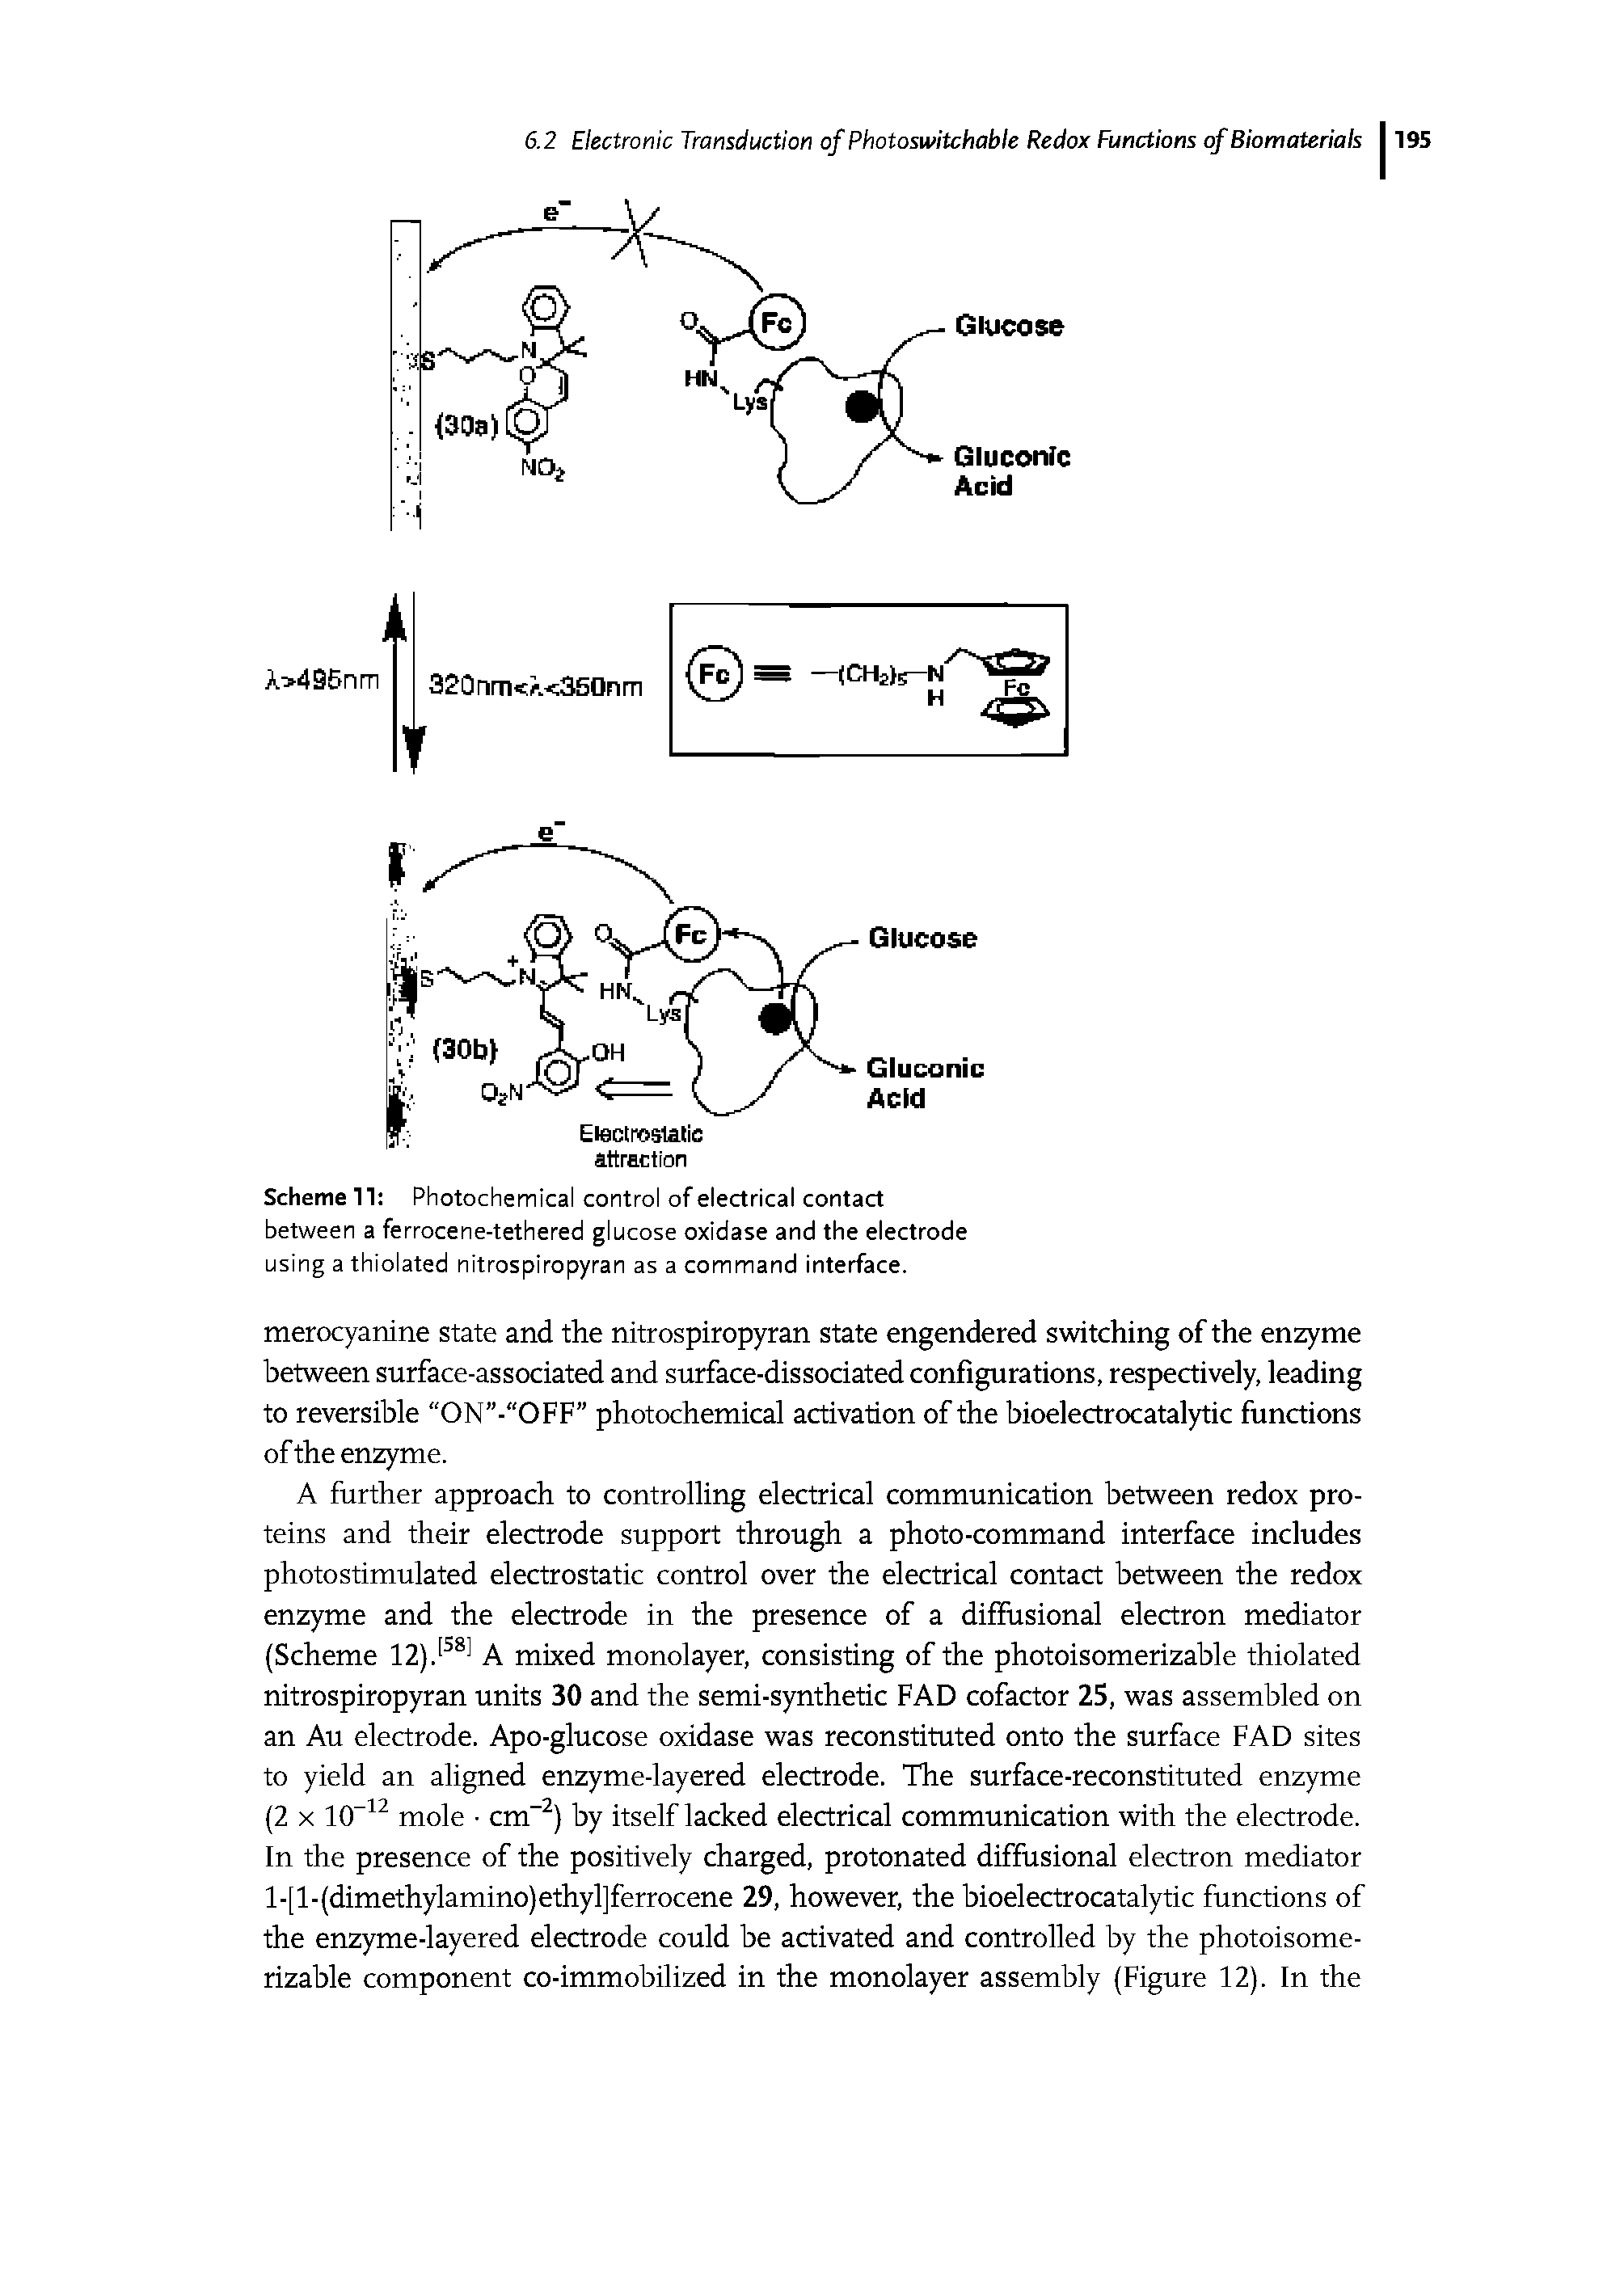 Scheme 11 Photochemical control of electrical contact between a ferrocene-tethered glucose oxidase and the electrode using a thiolated nitrospiropyran as a command interface.